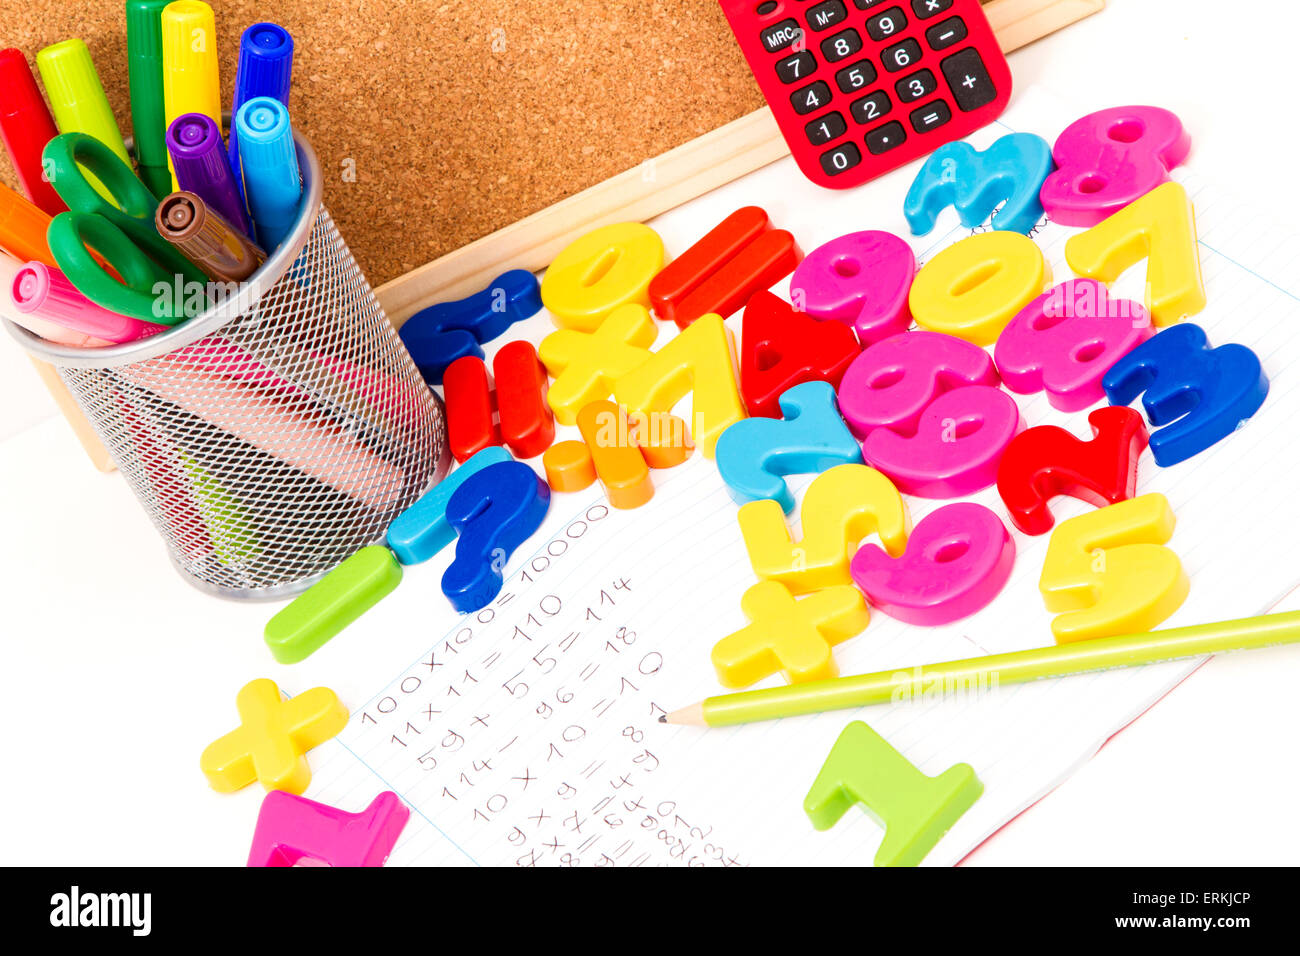 Studying maths, doing some calculations Stock Photo